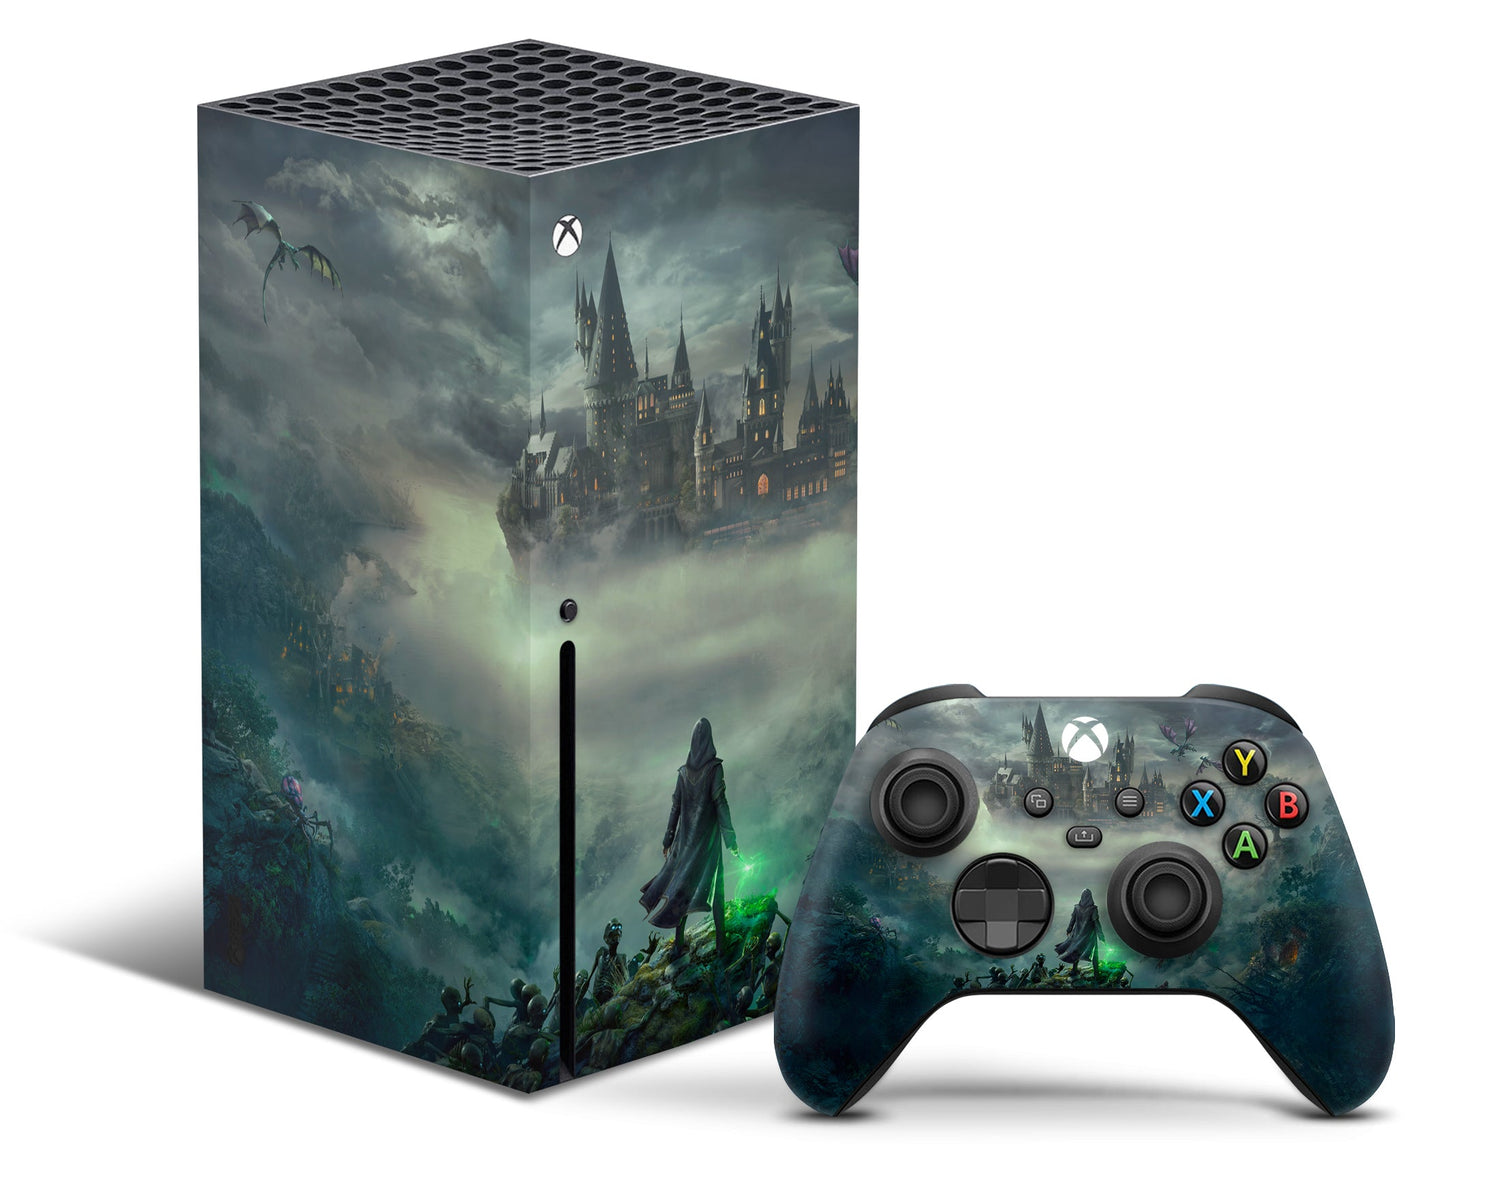 Hogwarts Legacy's PS5 and Xbox Series X